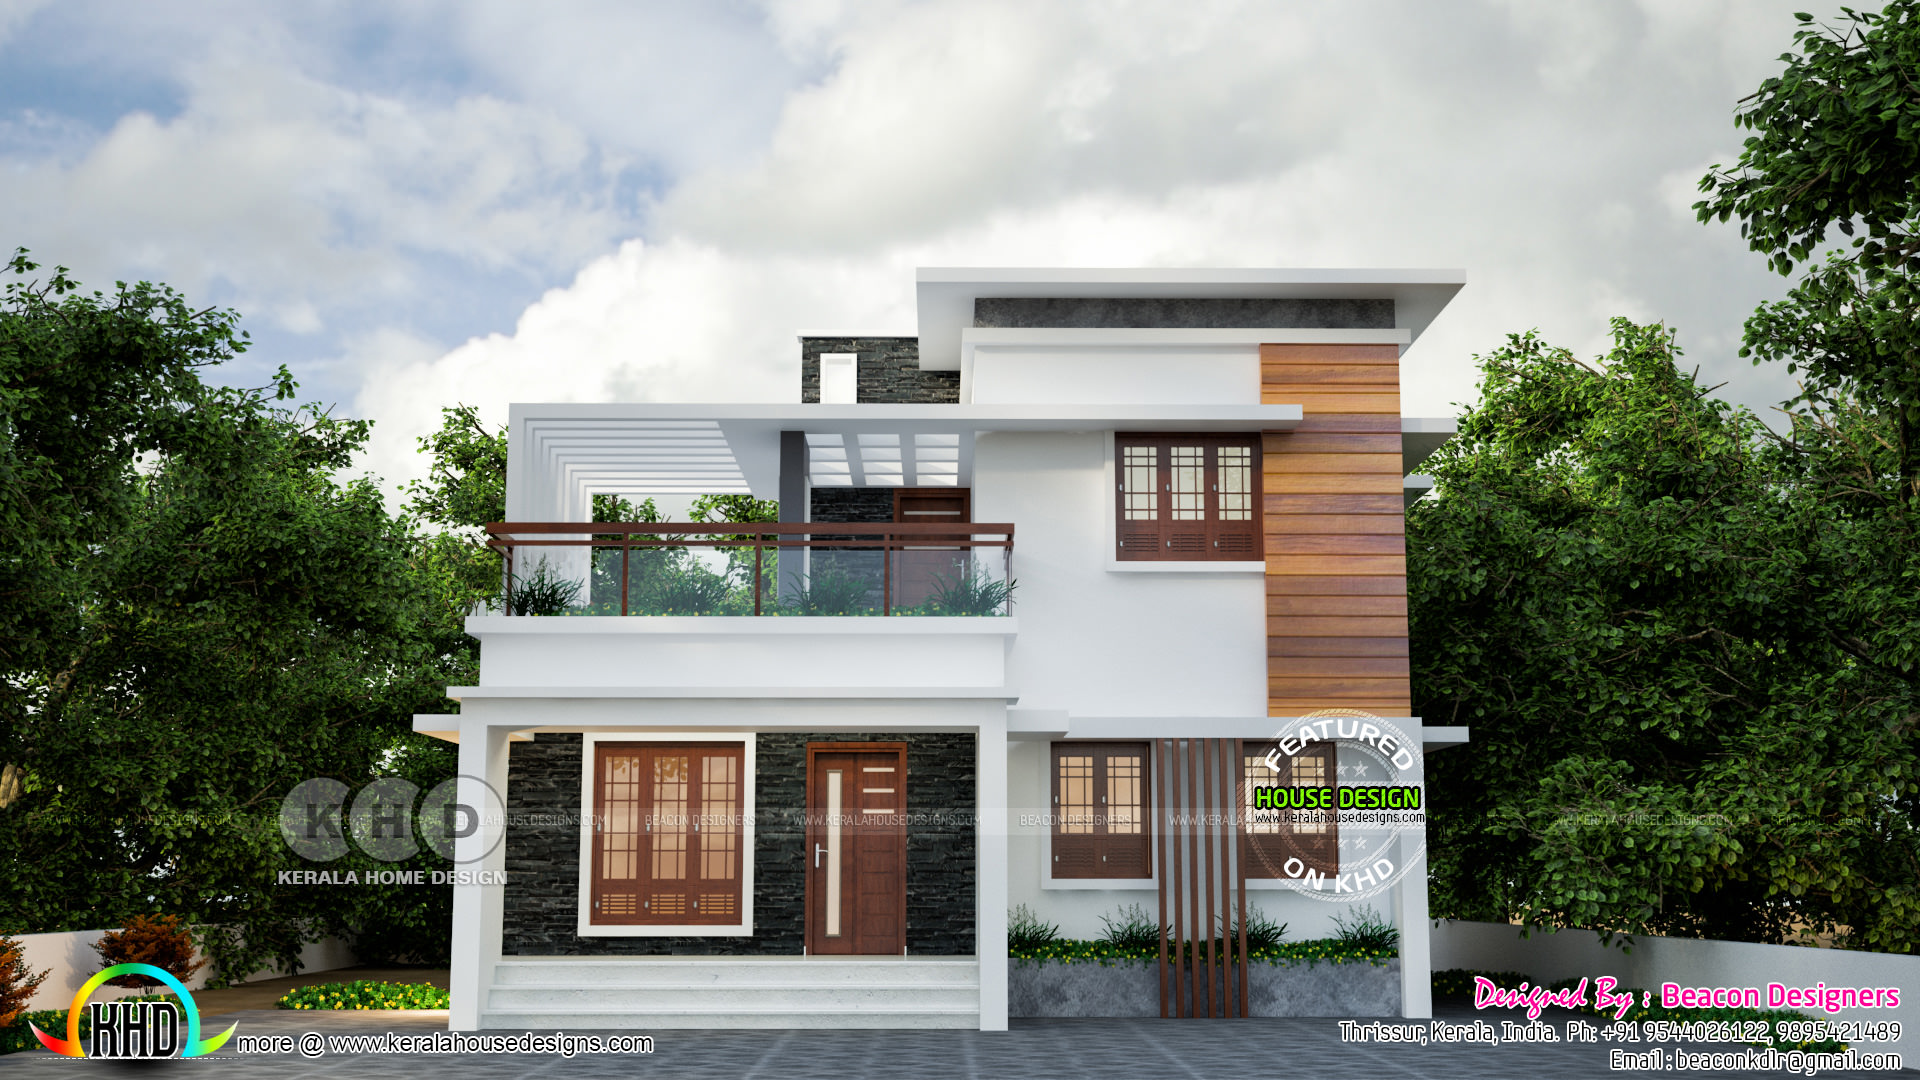 Grand flat roof style 3 bedroom house design - Kerala home design and